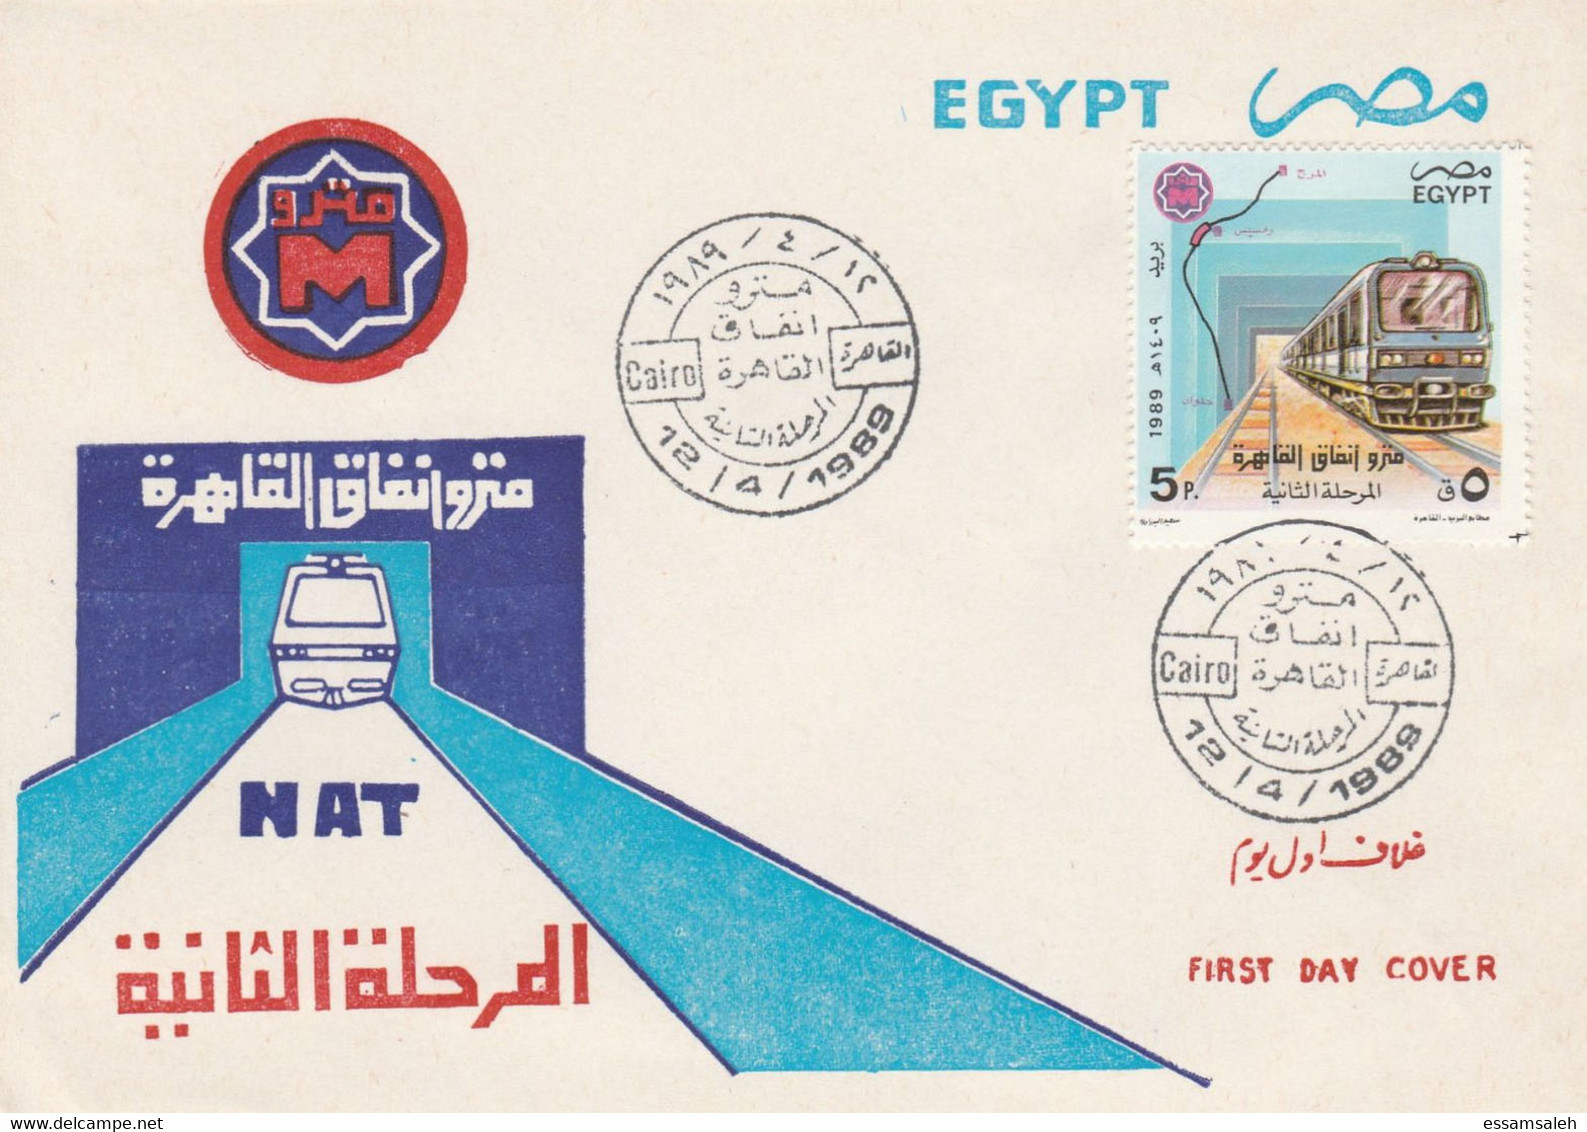 EGS30525 Egypt 1989 Illustrated FDC Cairo Metro - Phase II - Covers & Documents